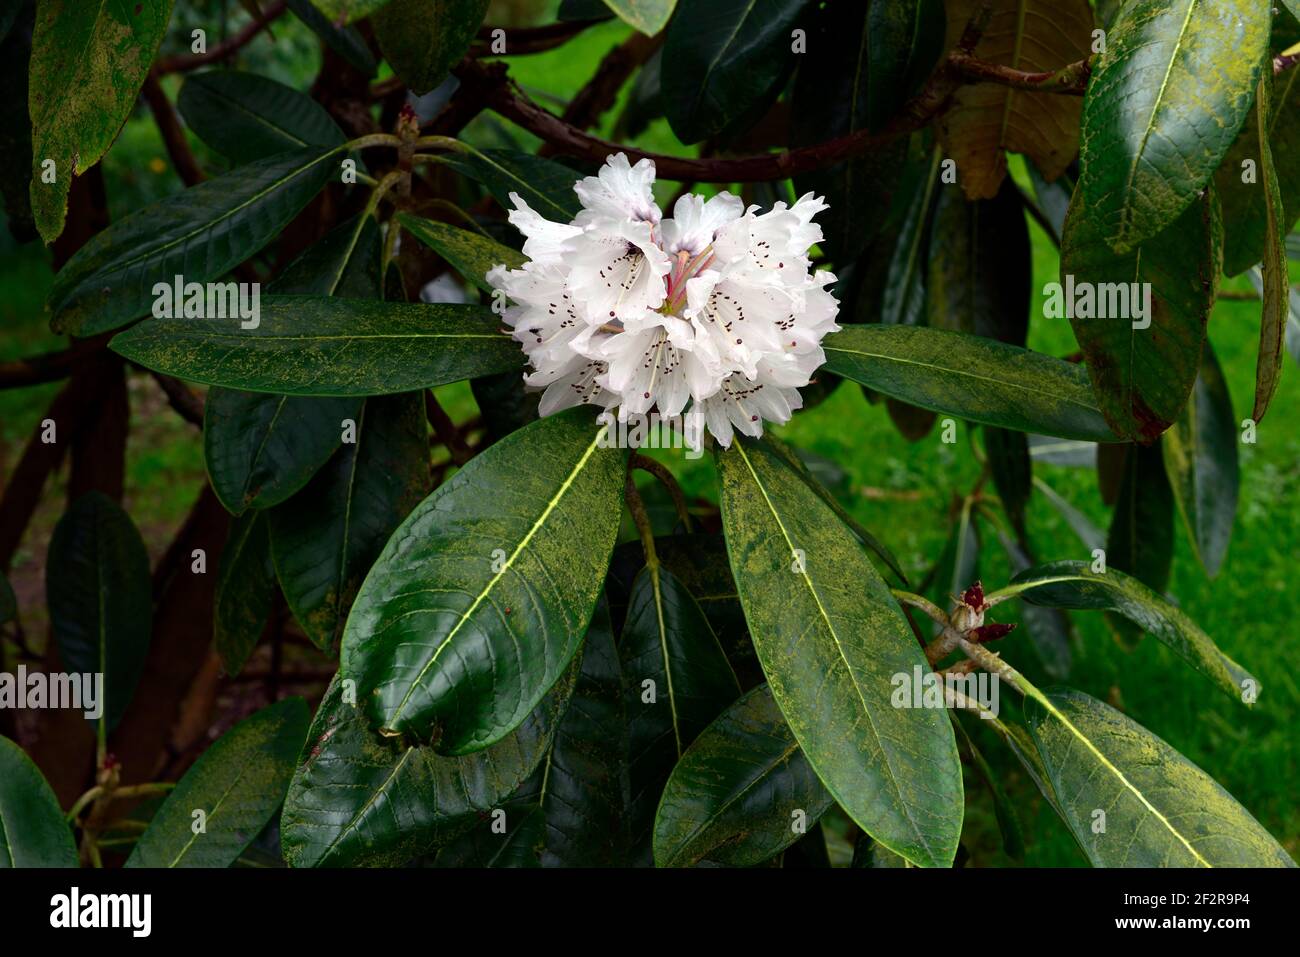 Rhododendron falconeri,falconer rhododendron,white flowers,glossy green leaves,foliage,rhododendrons,spring in the garden,RM floral Stock Photo